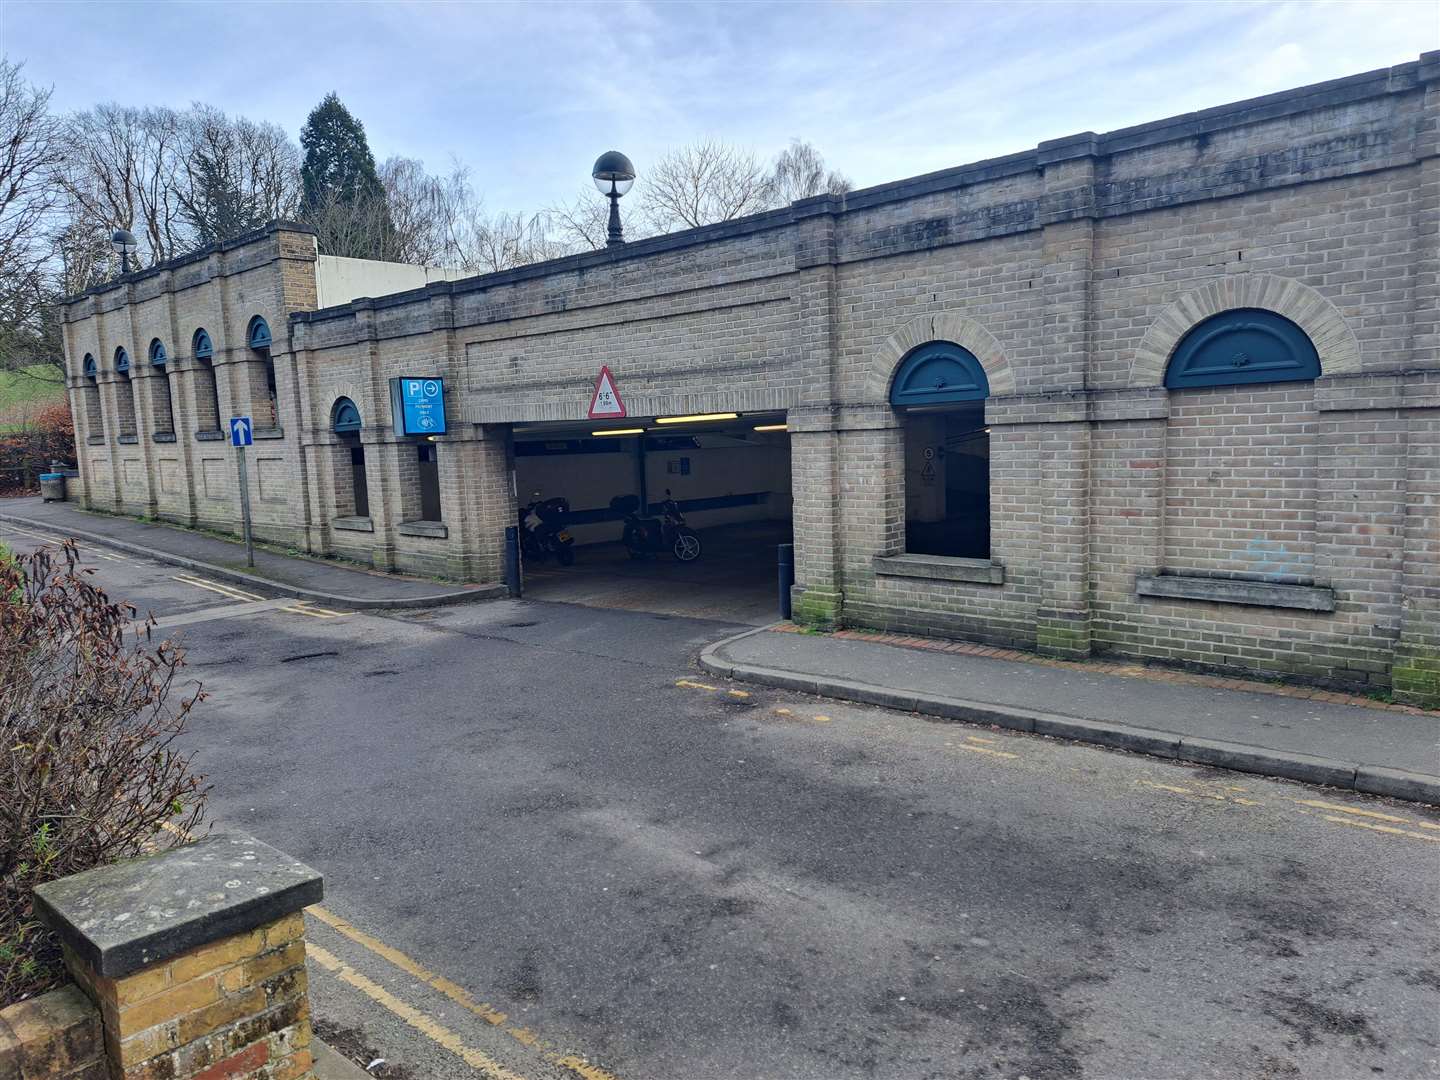 The Great Hall Car Park in Mount Pleasant Avenue